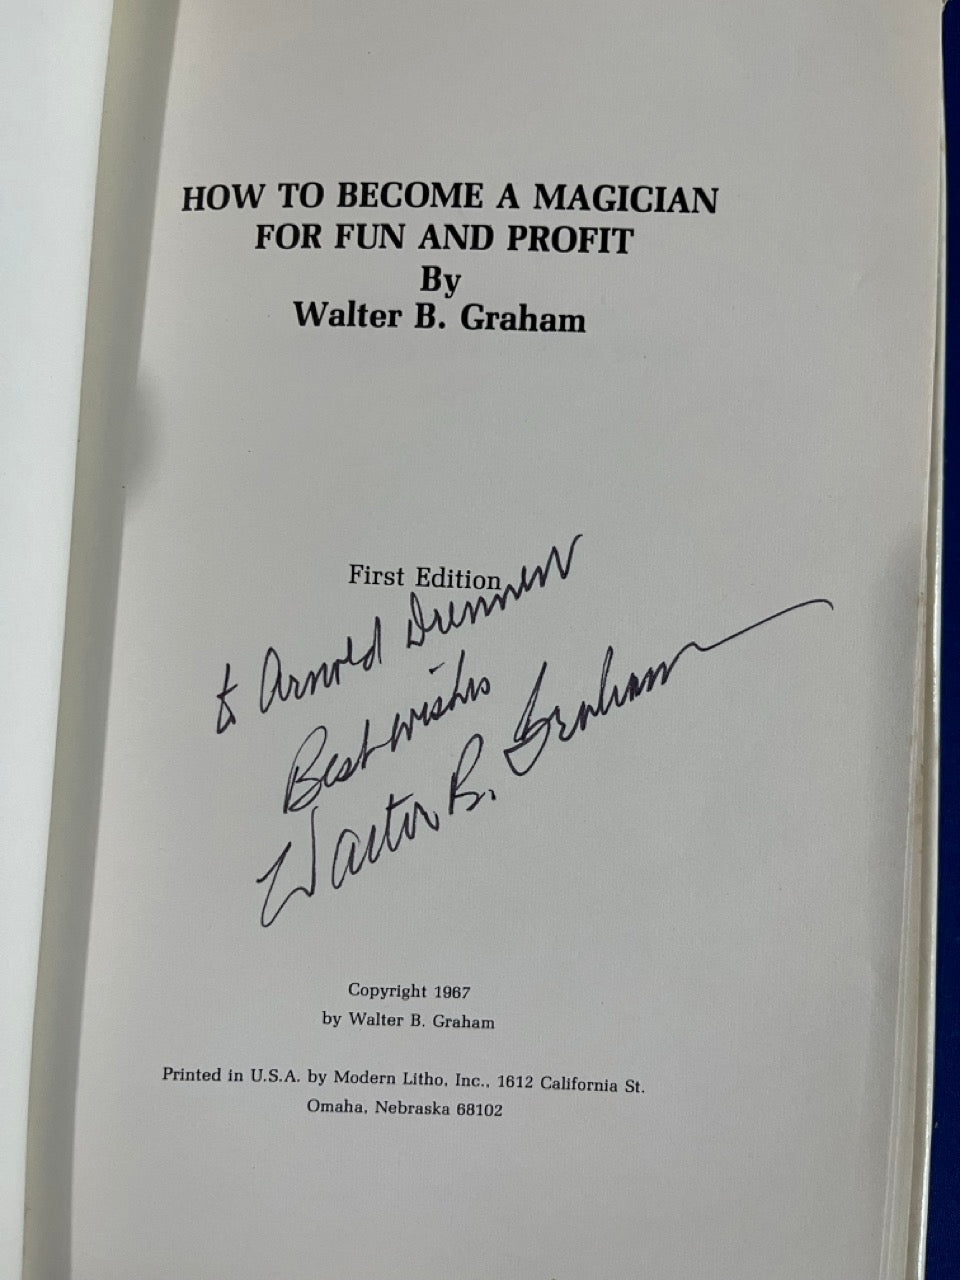 How To Become A Magician for Fun and Profit - Walter B. Graham - SIGNED